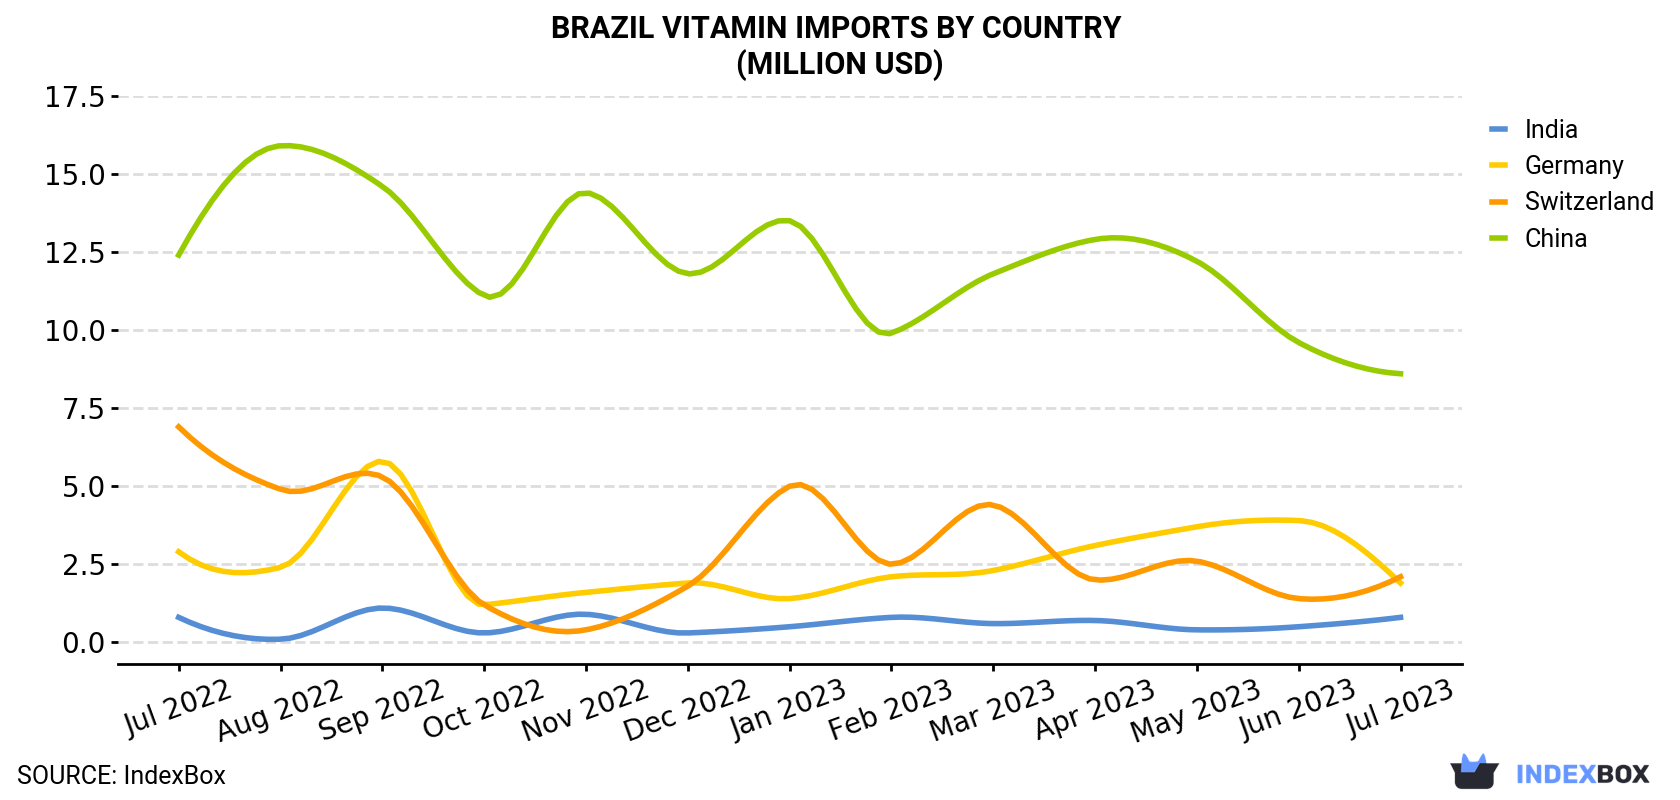 Brazil Vitamin Imports By Country (Million USD)